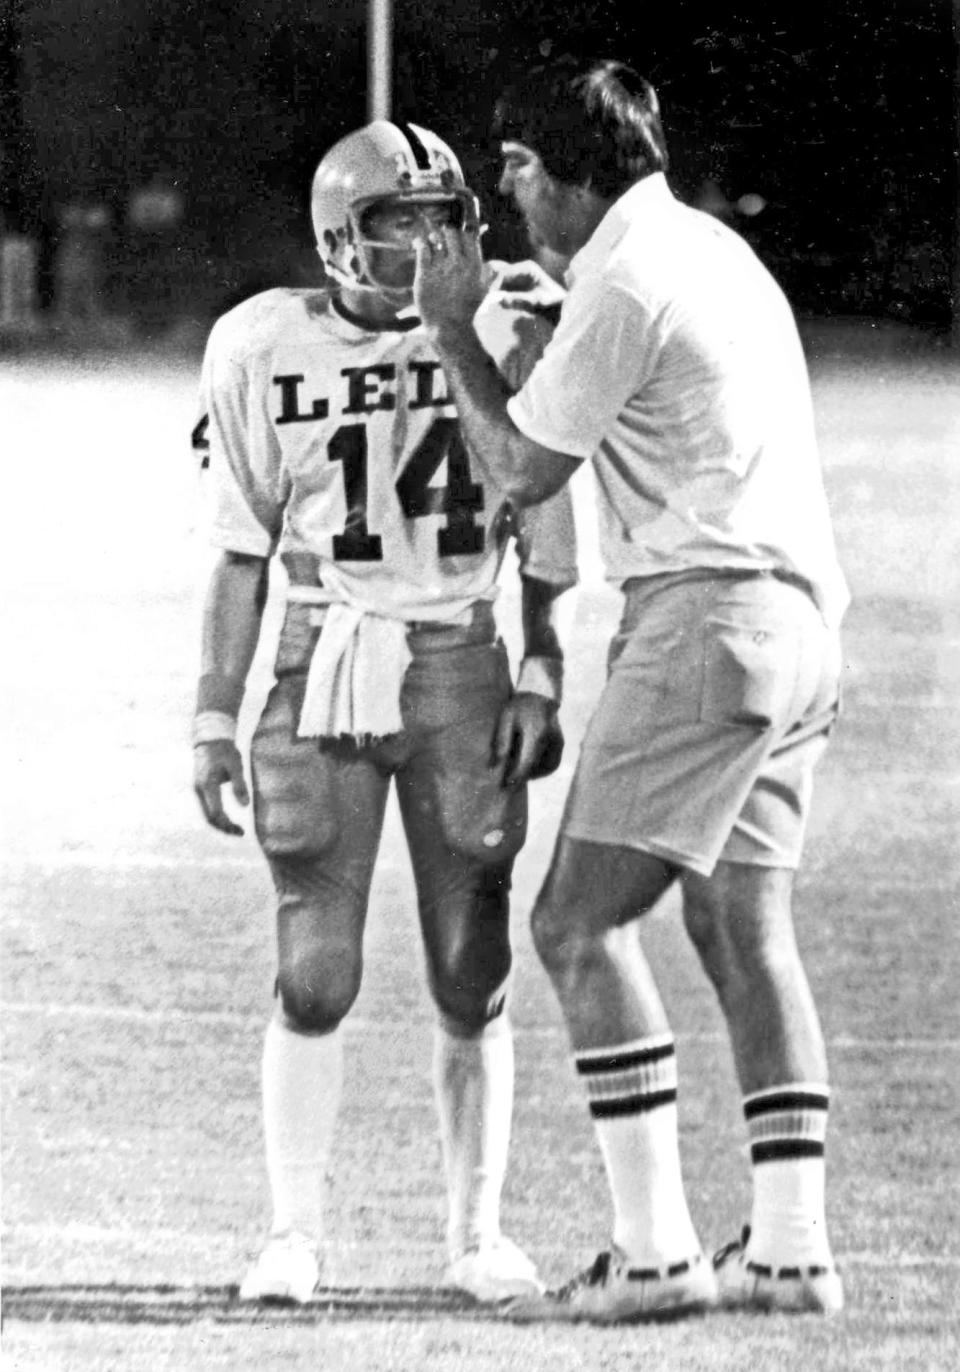 Lely Coach Bill "Bubba" Broxson grabs Rick Hansom's face mask as he sends in a play during the Trojans game against Naples in 1978.